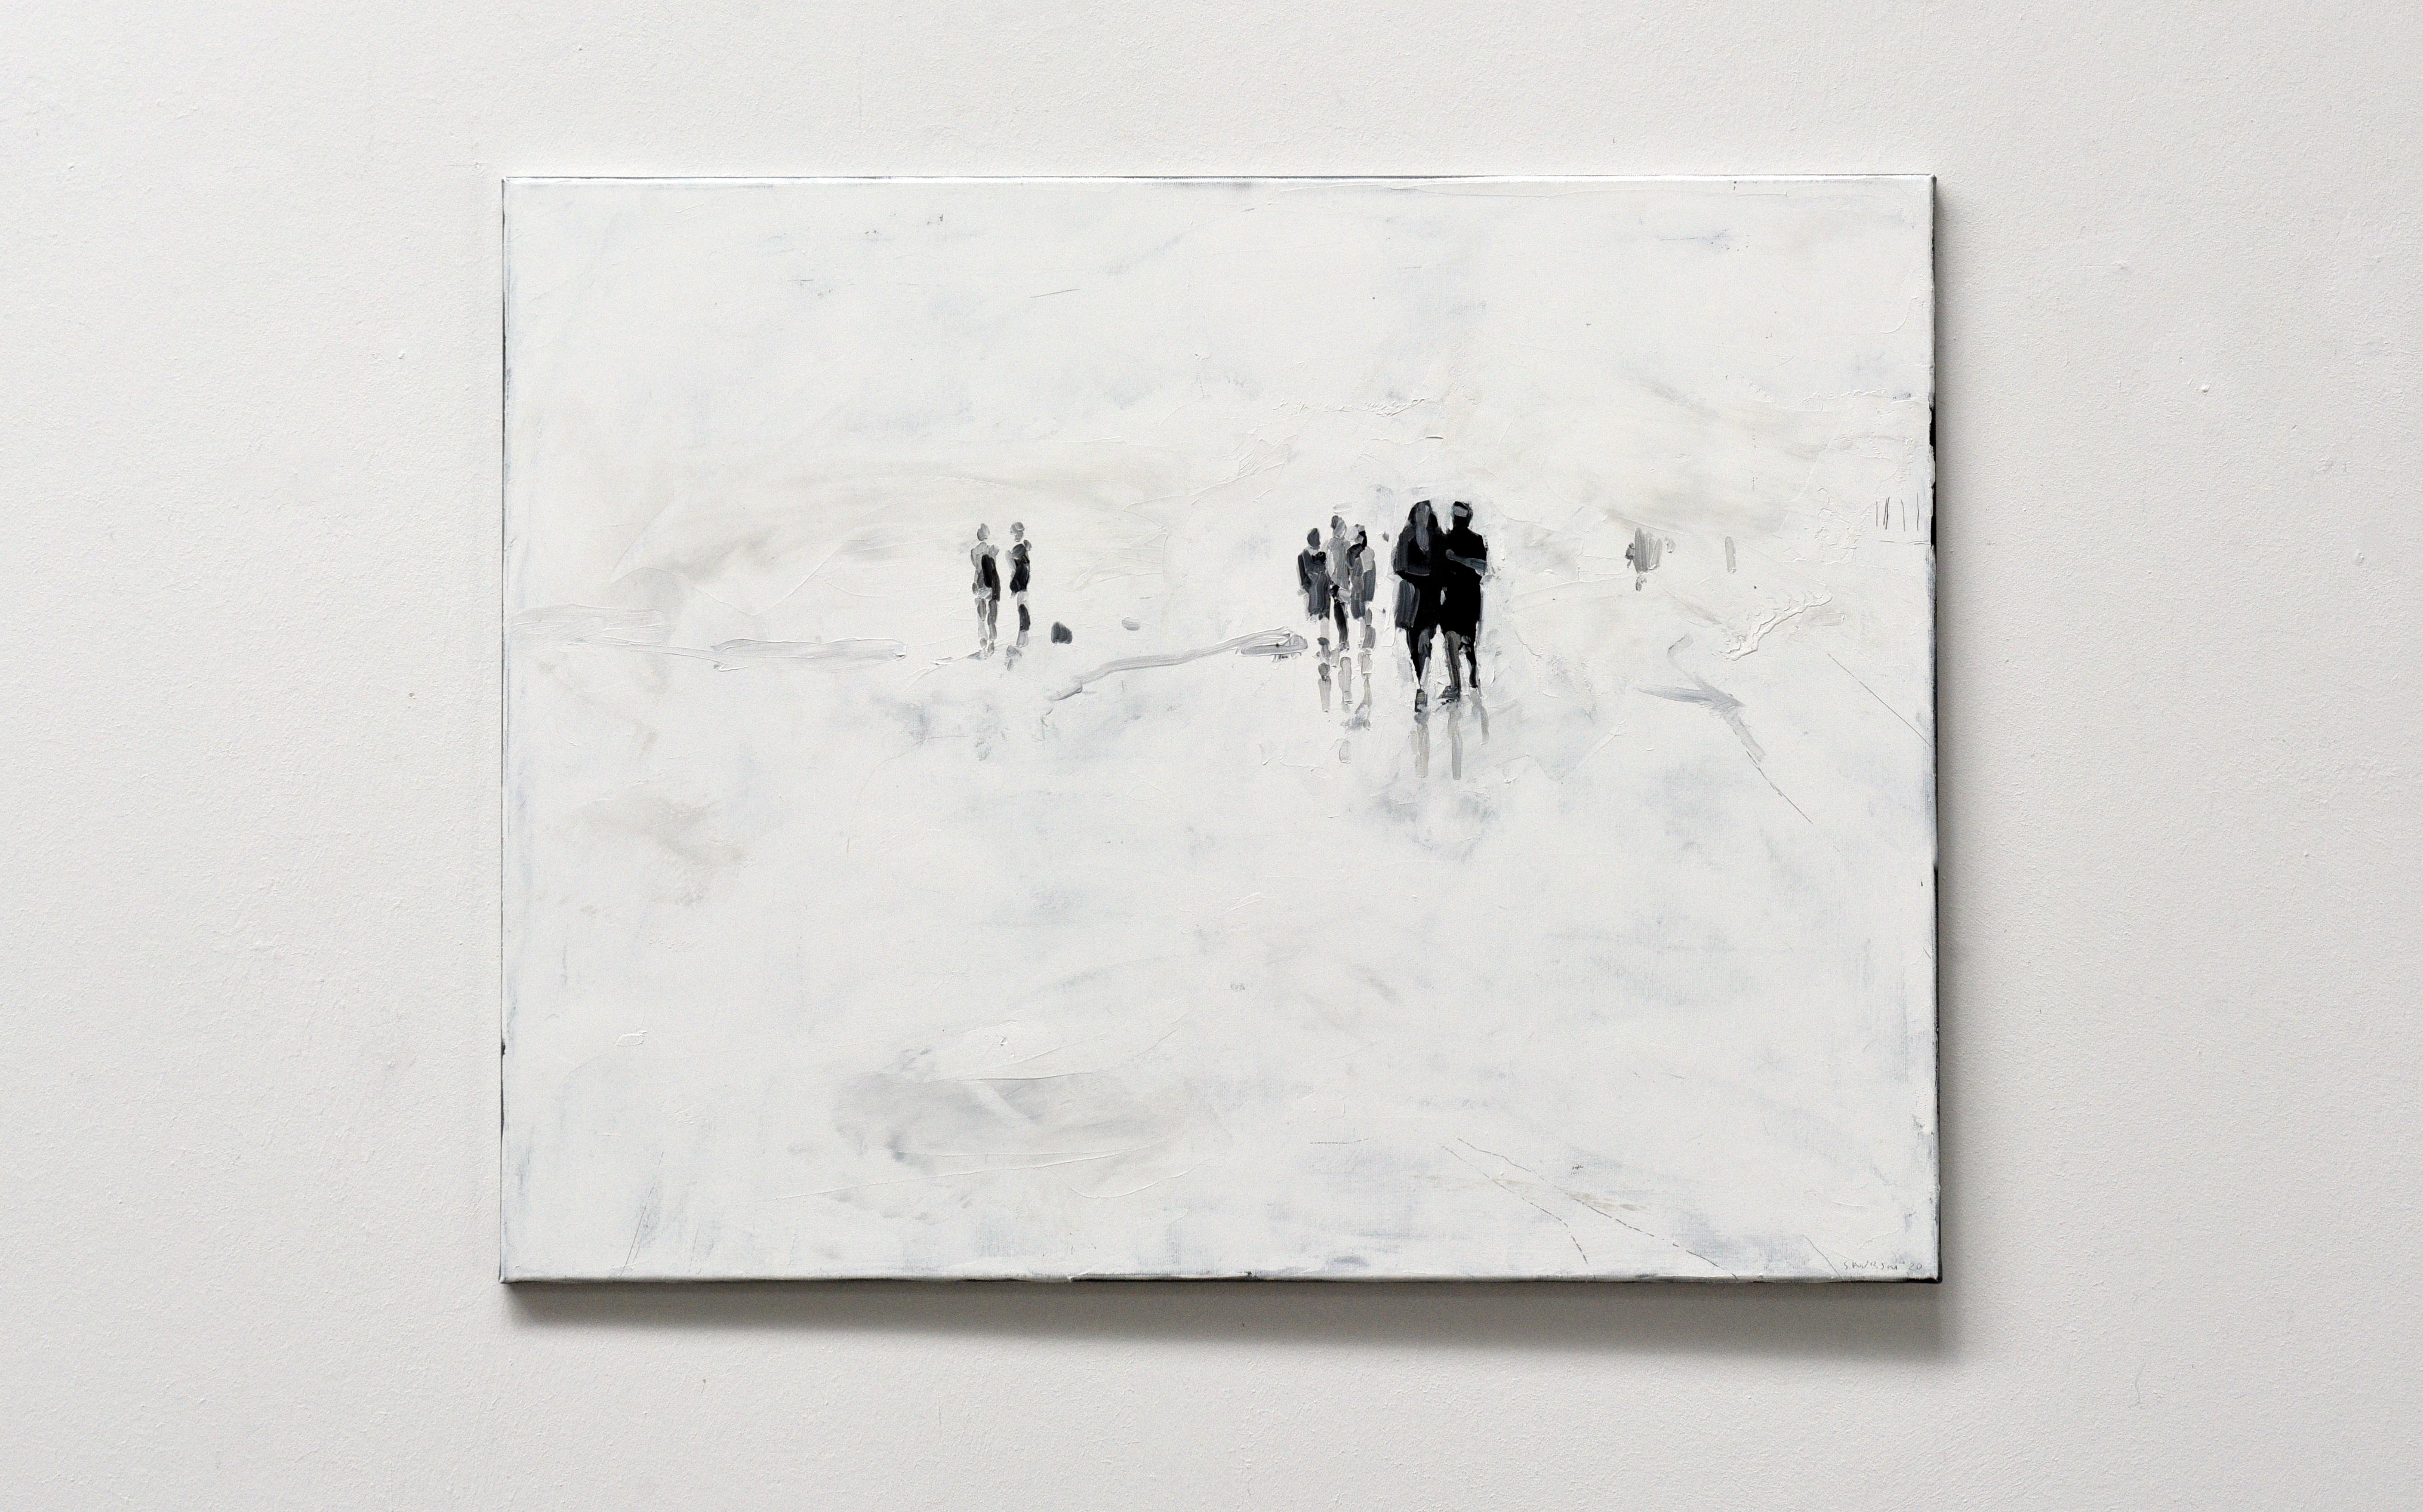 Walking Wounded
70 x 90 cm
oil on canvas
2020

A wide, apparently endless plain forms the background of the events: out of nowhere, dark figures enter the scenery, as if coming from the depths of the canvas, appearing through layers of bright, shiny